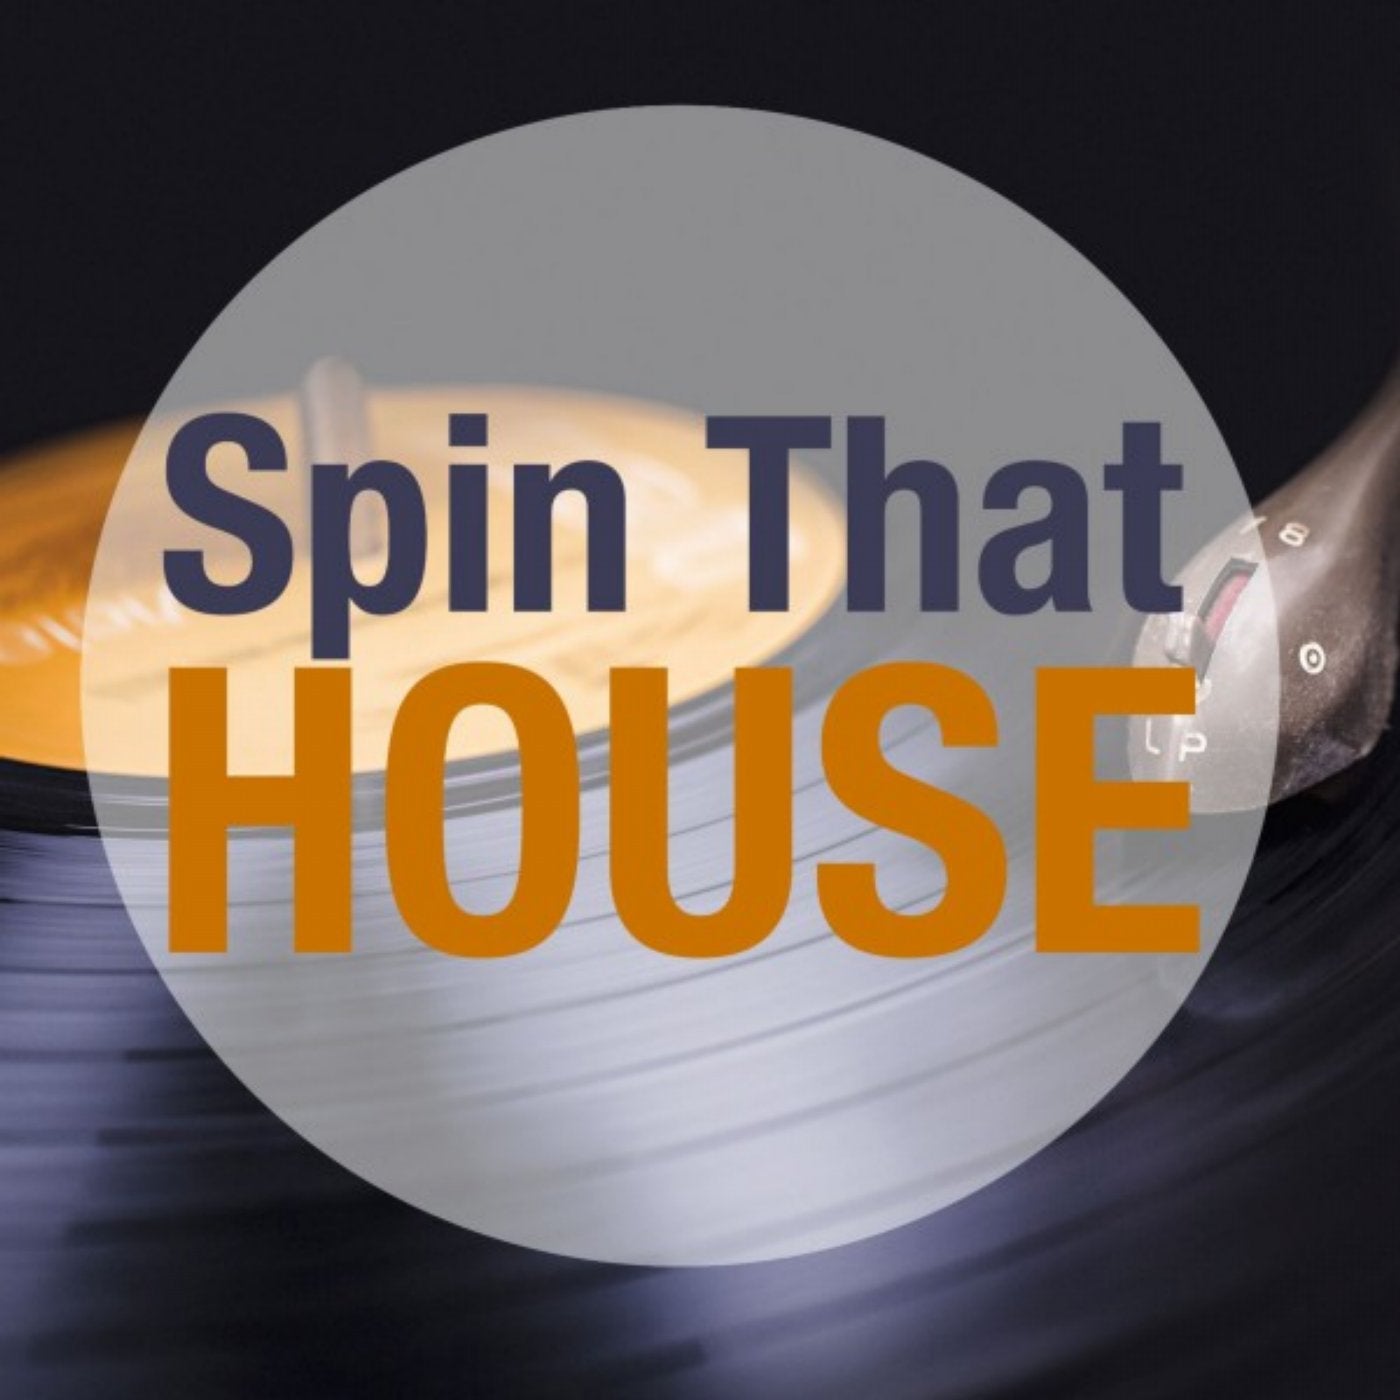 Spin That House